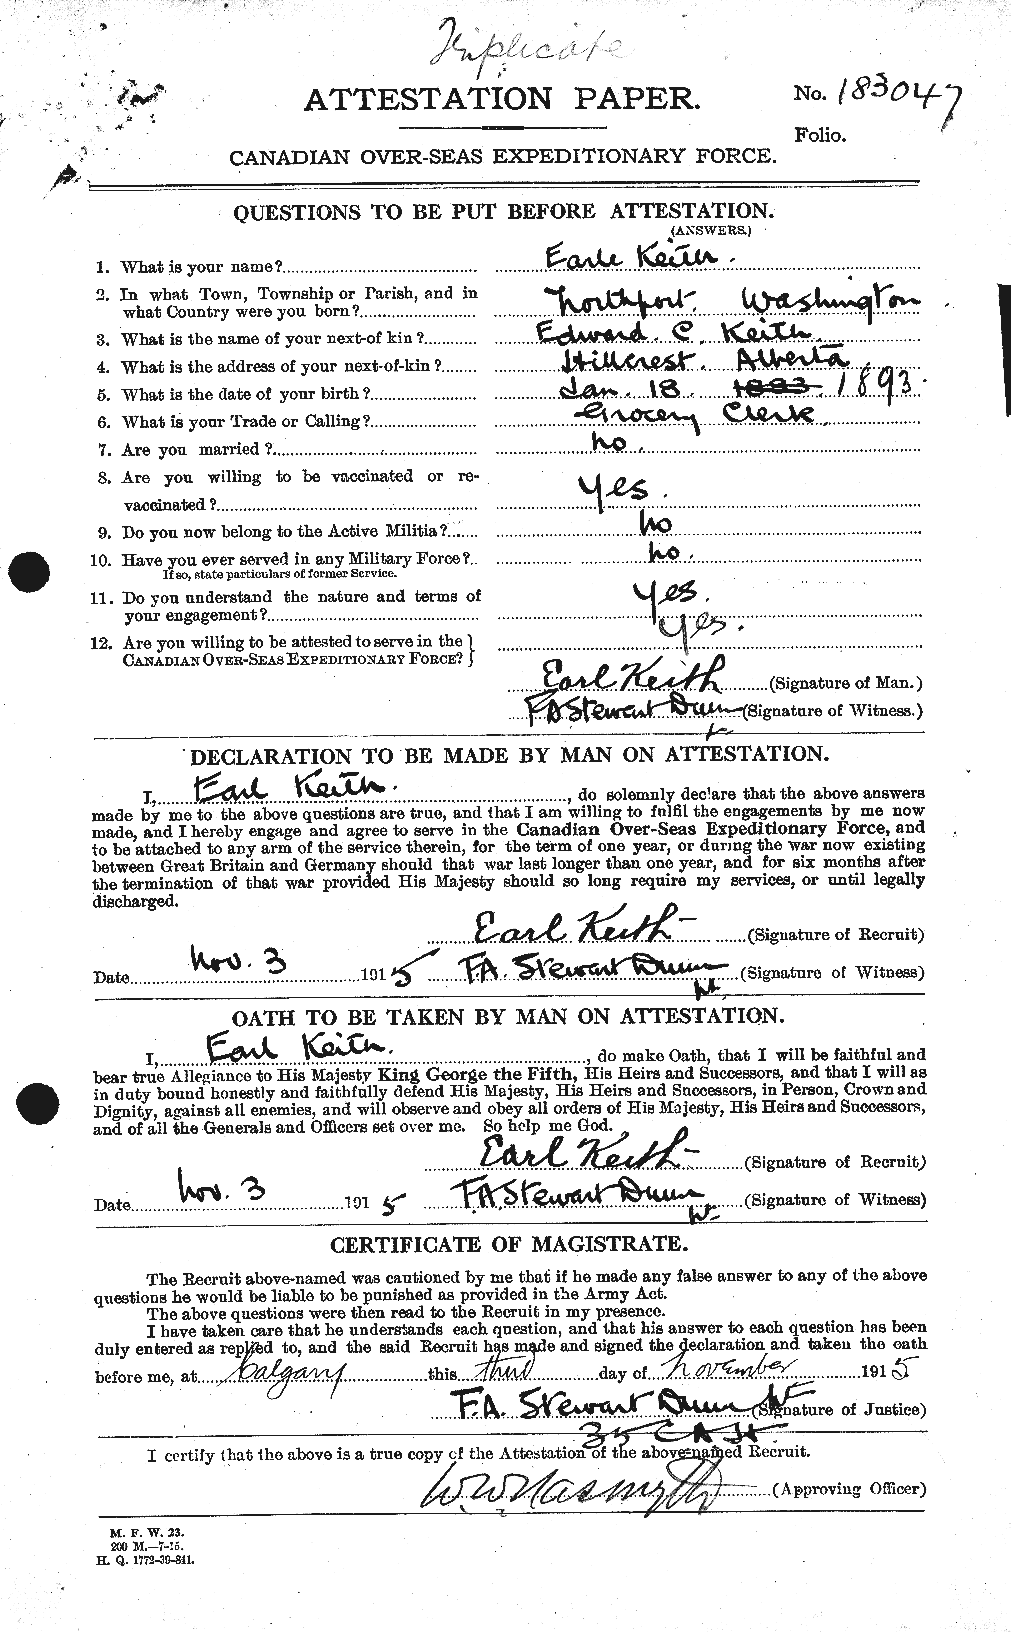 Personnel Records of the First World War - CEF 432412a